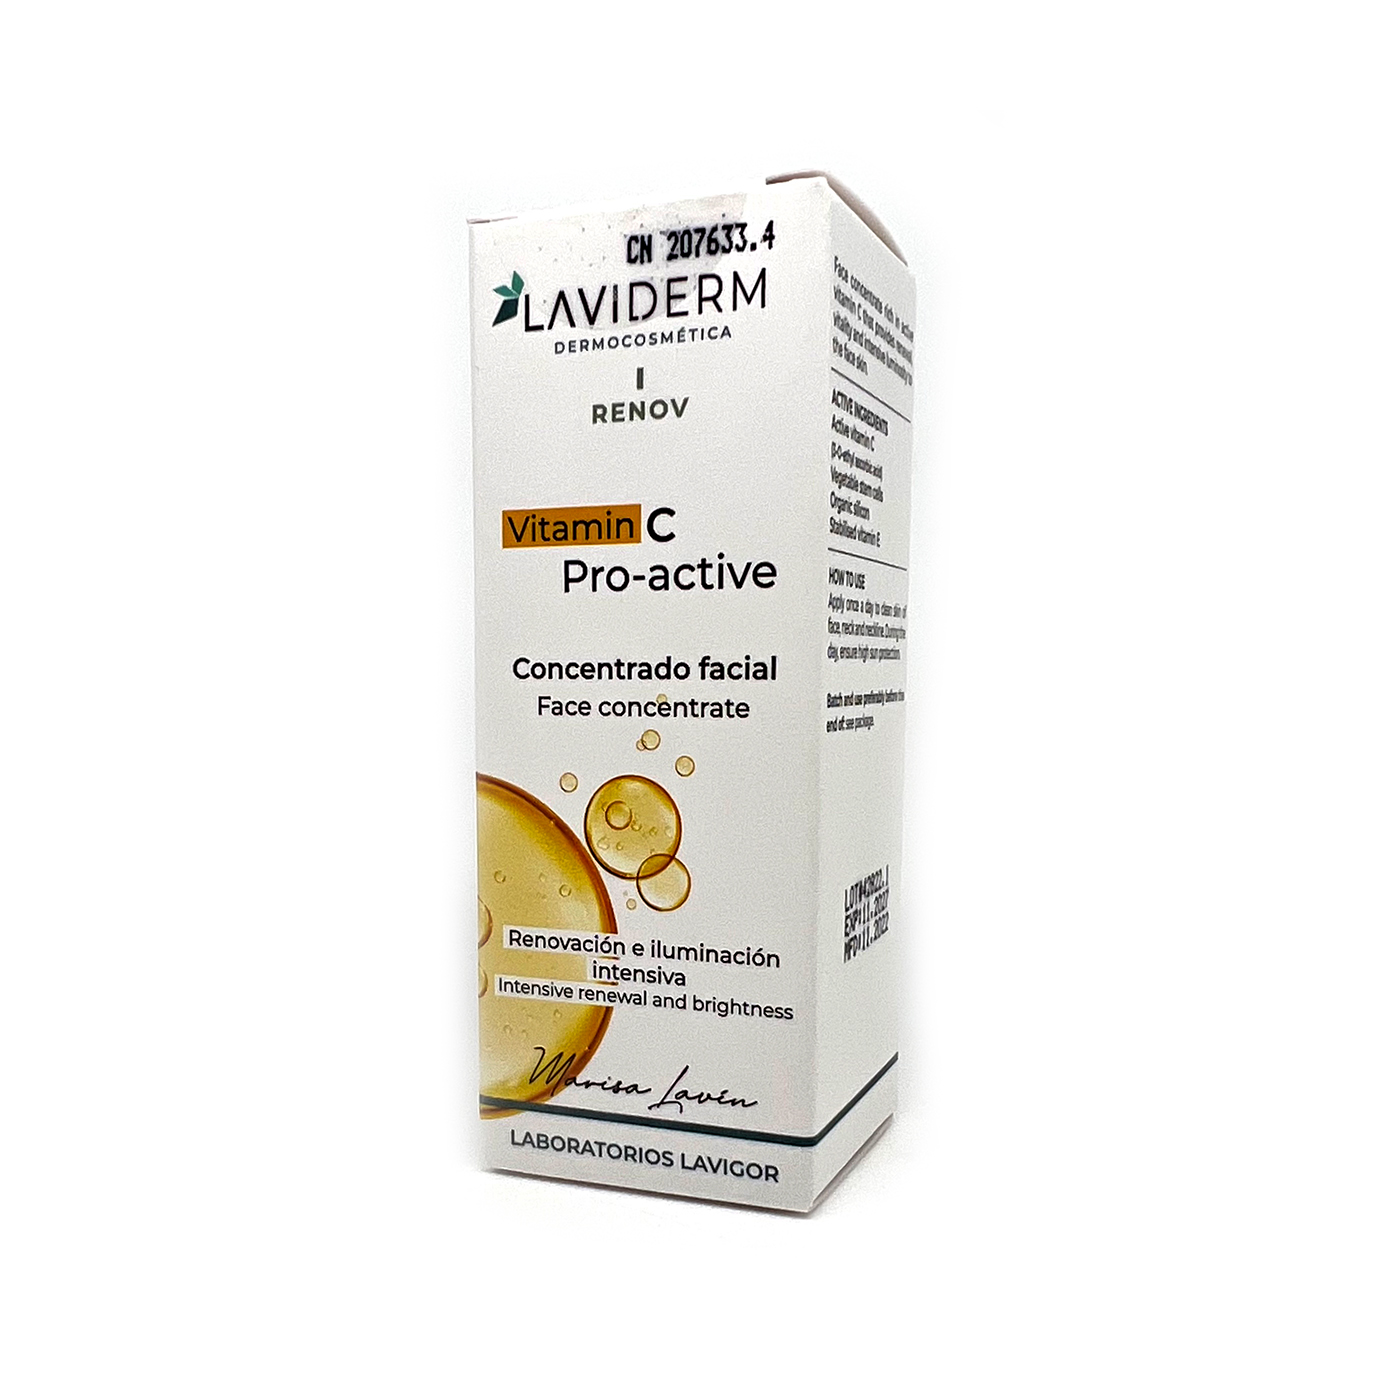 Pro-active VITAMIN C face concentrate serums Laviderm 30ml